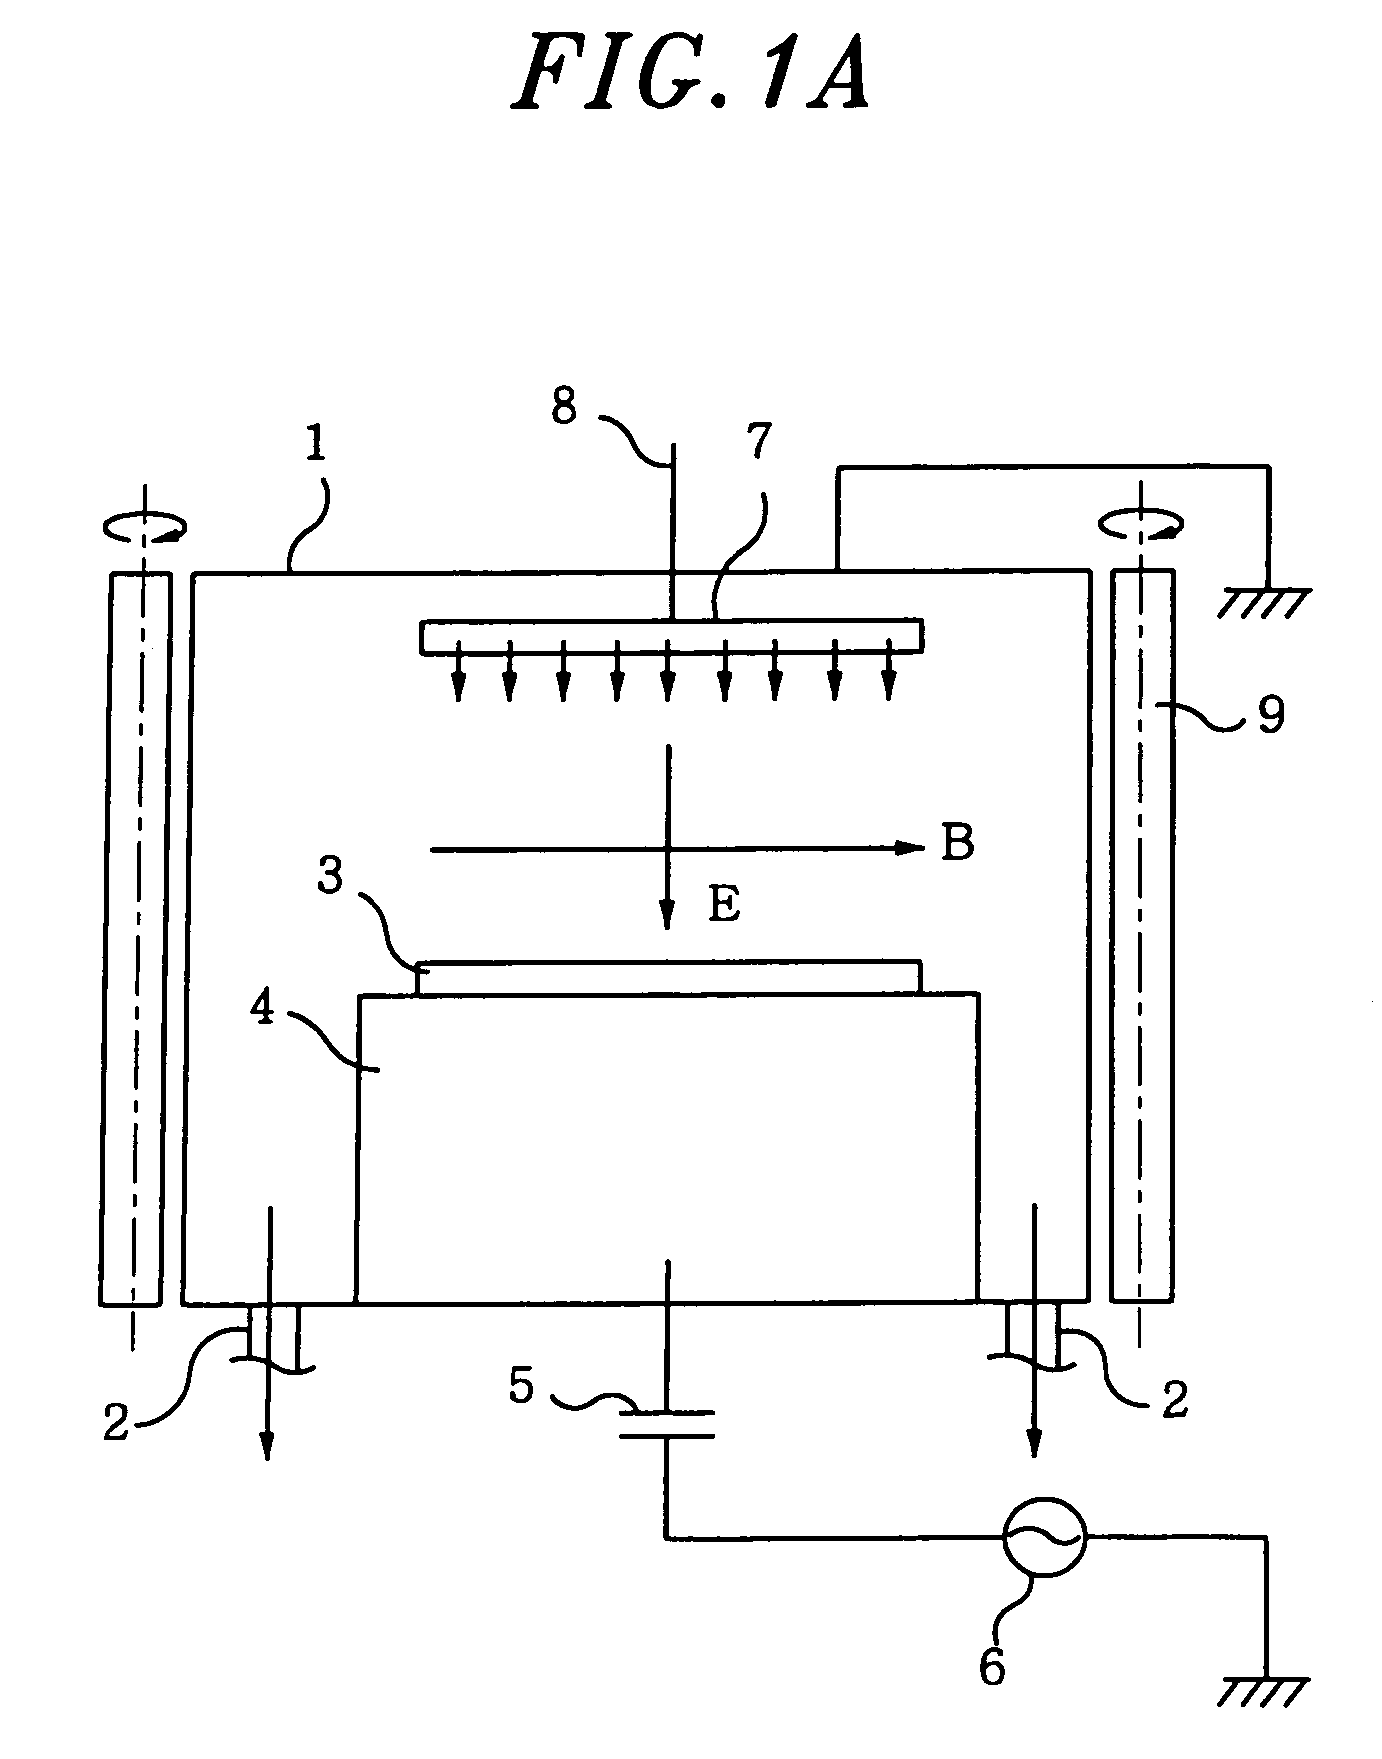 Plasma processing apparatus, control method thereof and program for performing same